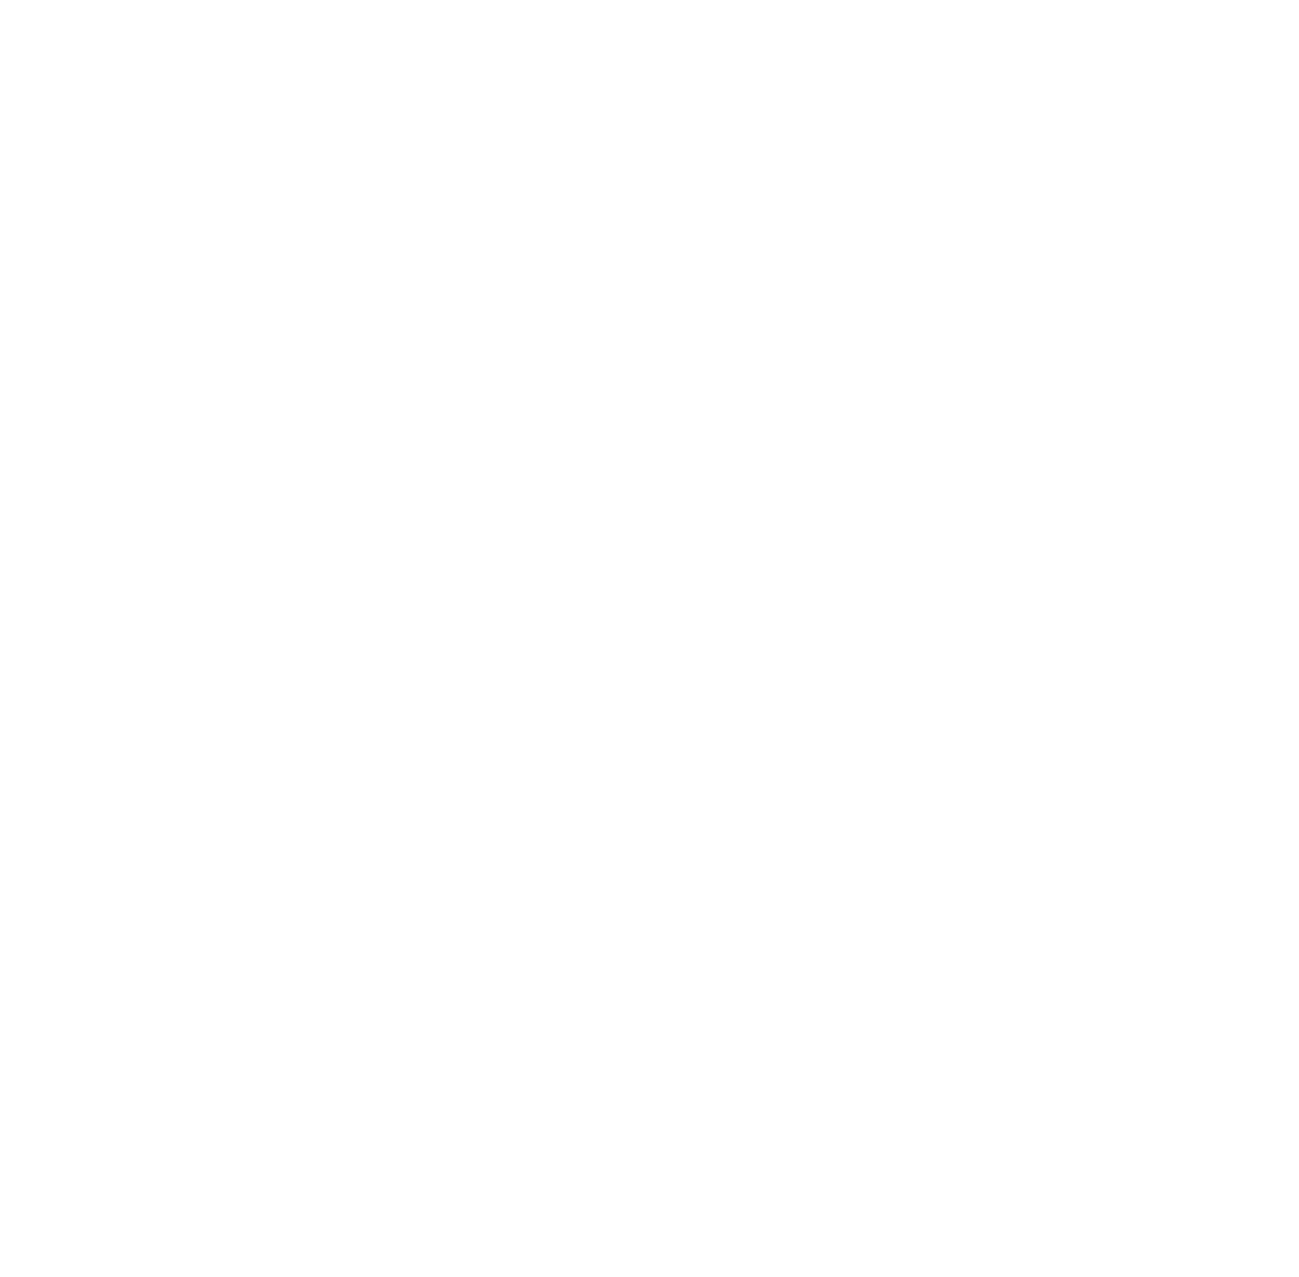 Firm of the future